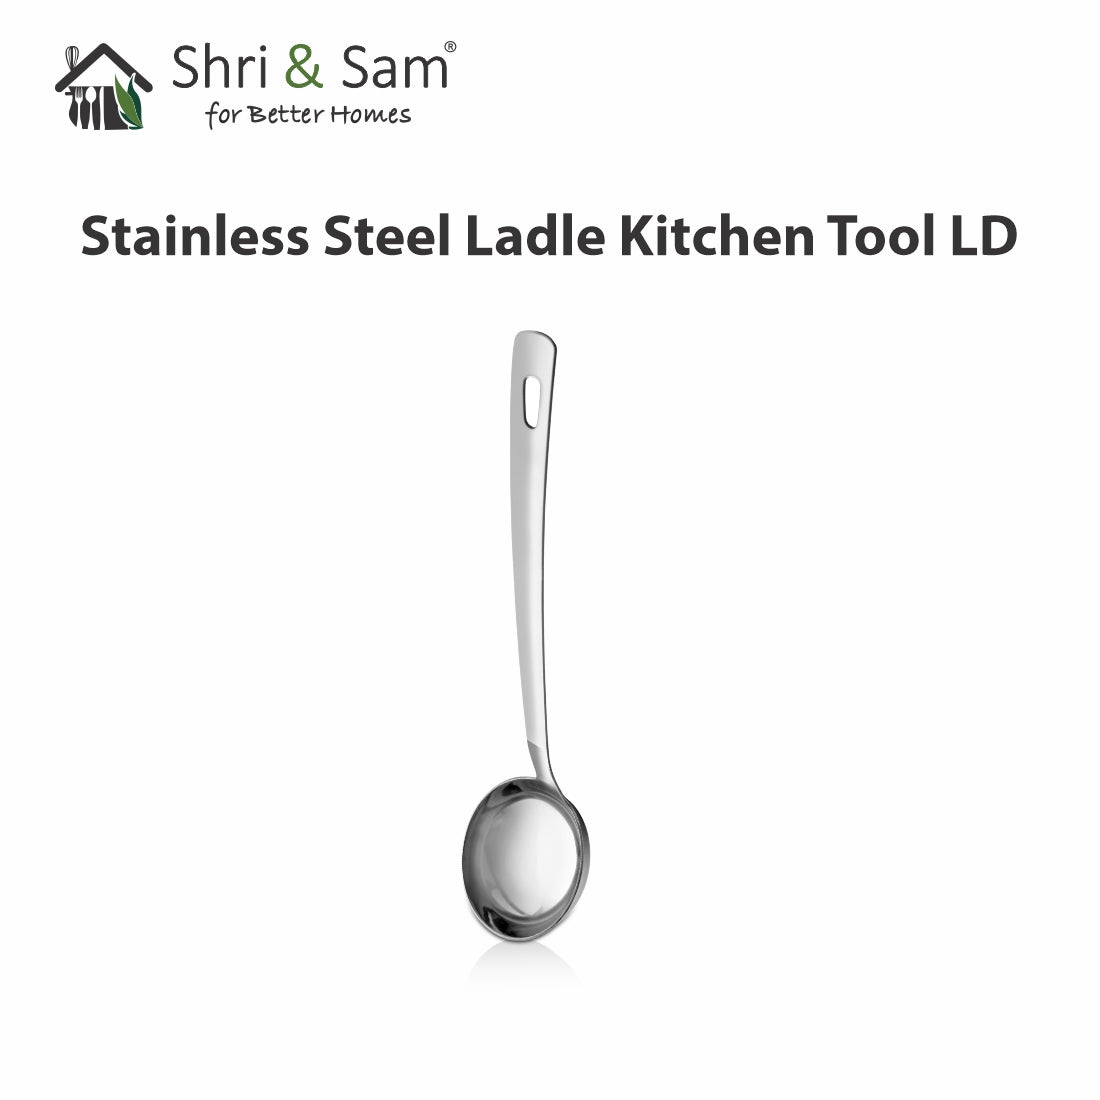 Stainless Steel Ladle Kitchen Tool LD